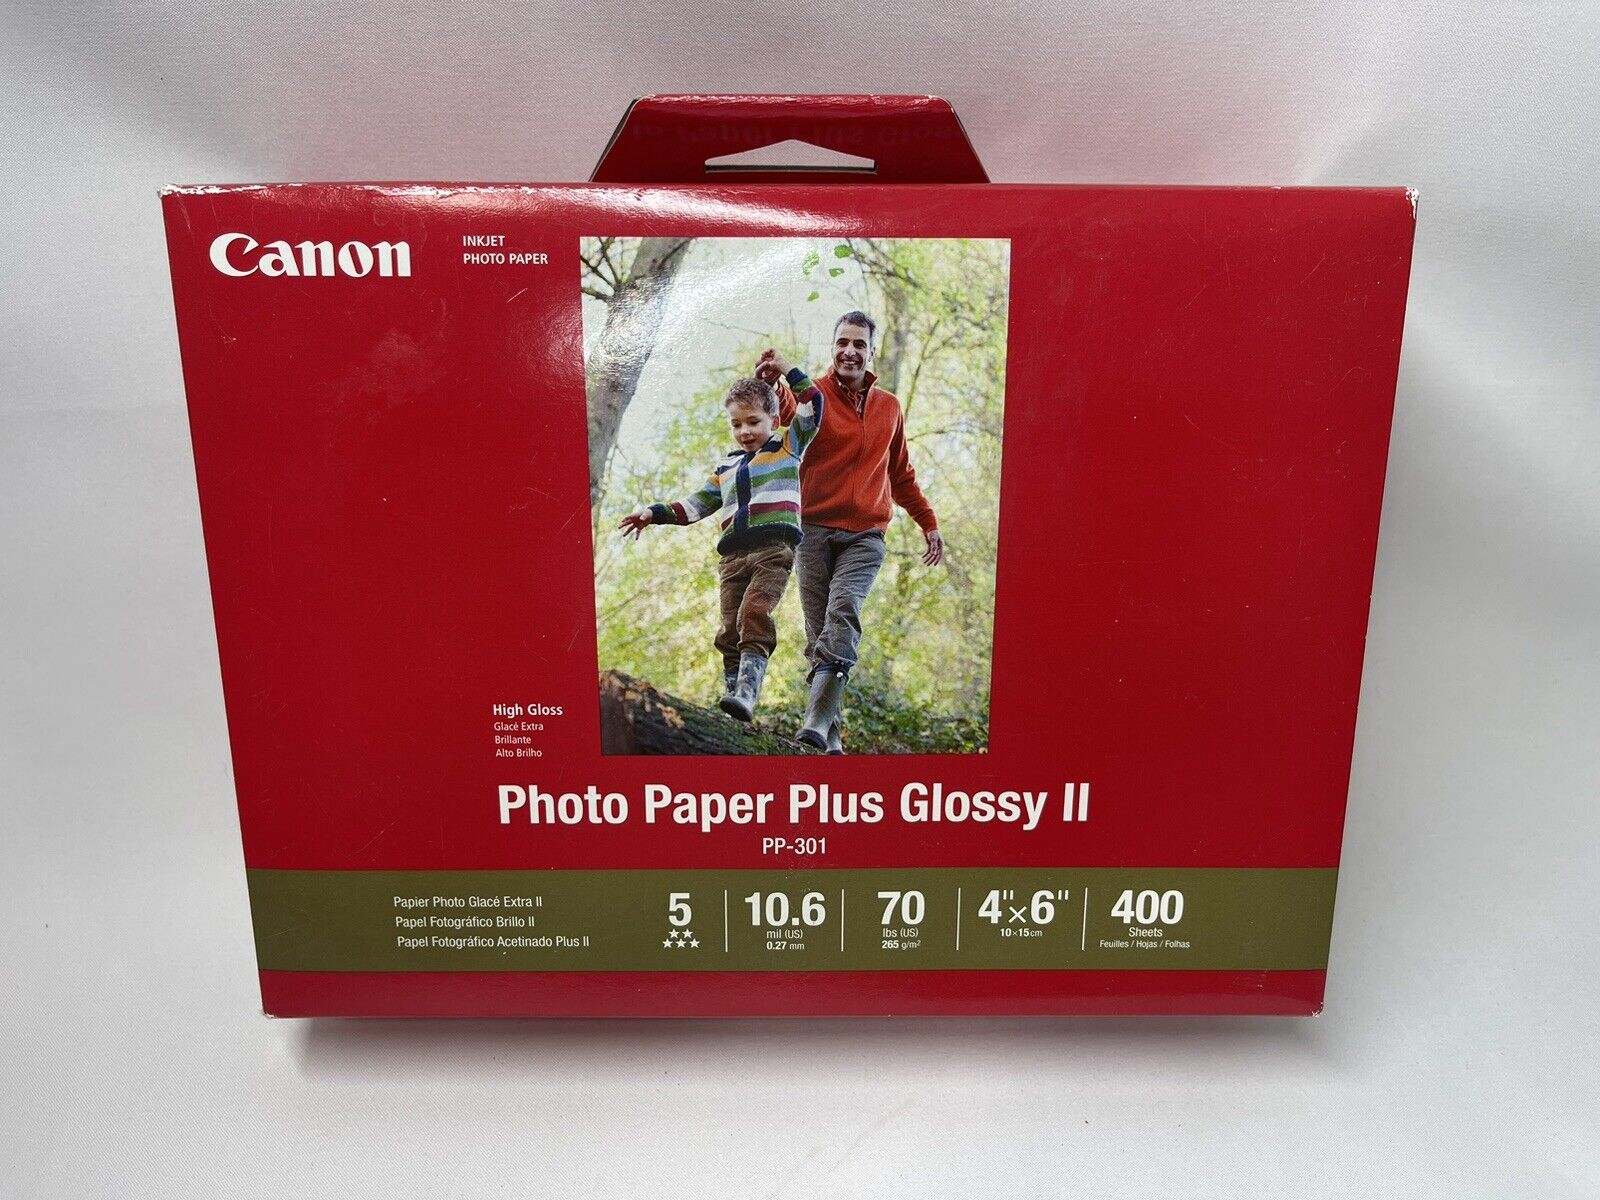 CANON PLUS GLOSSY II PHOTO PAPER 1432C007 4”x6” 400 SHEETS PP-301